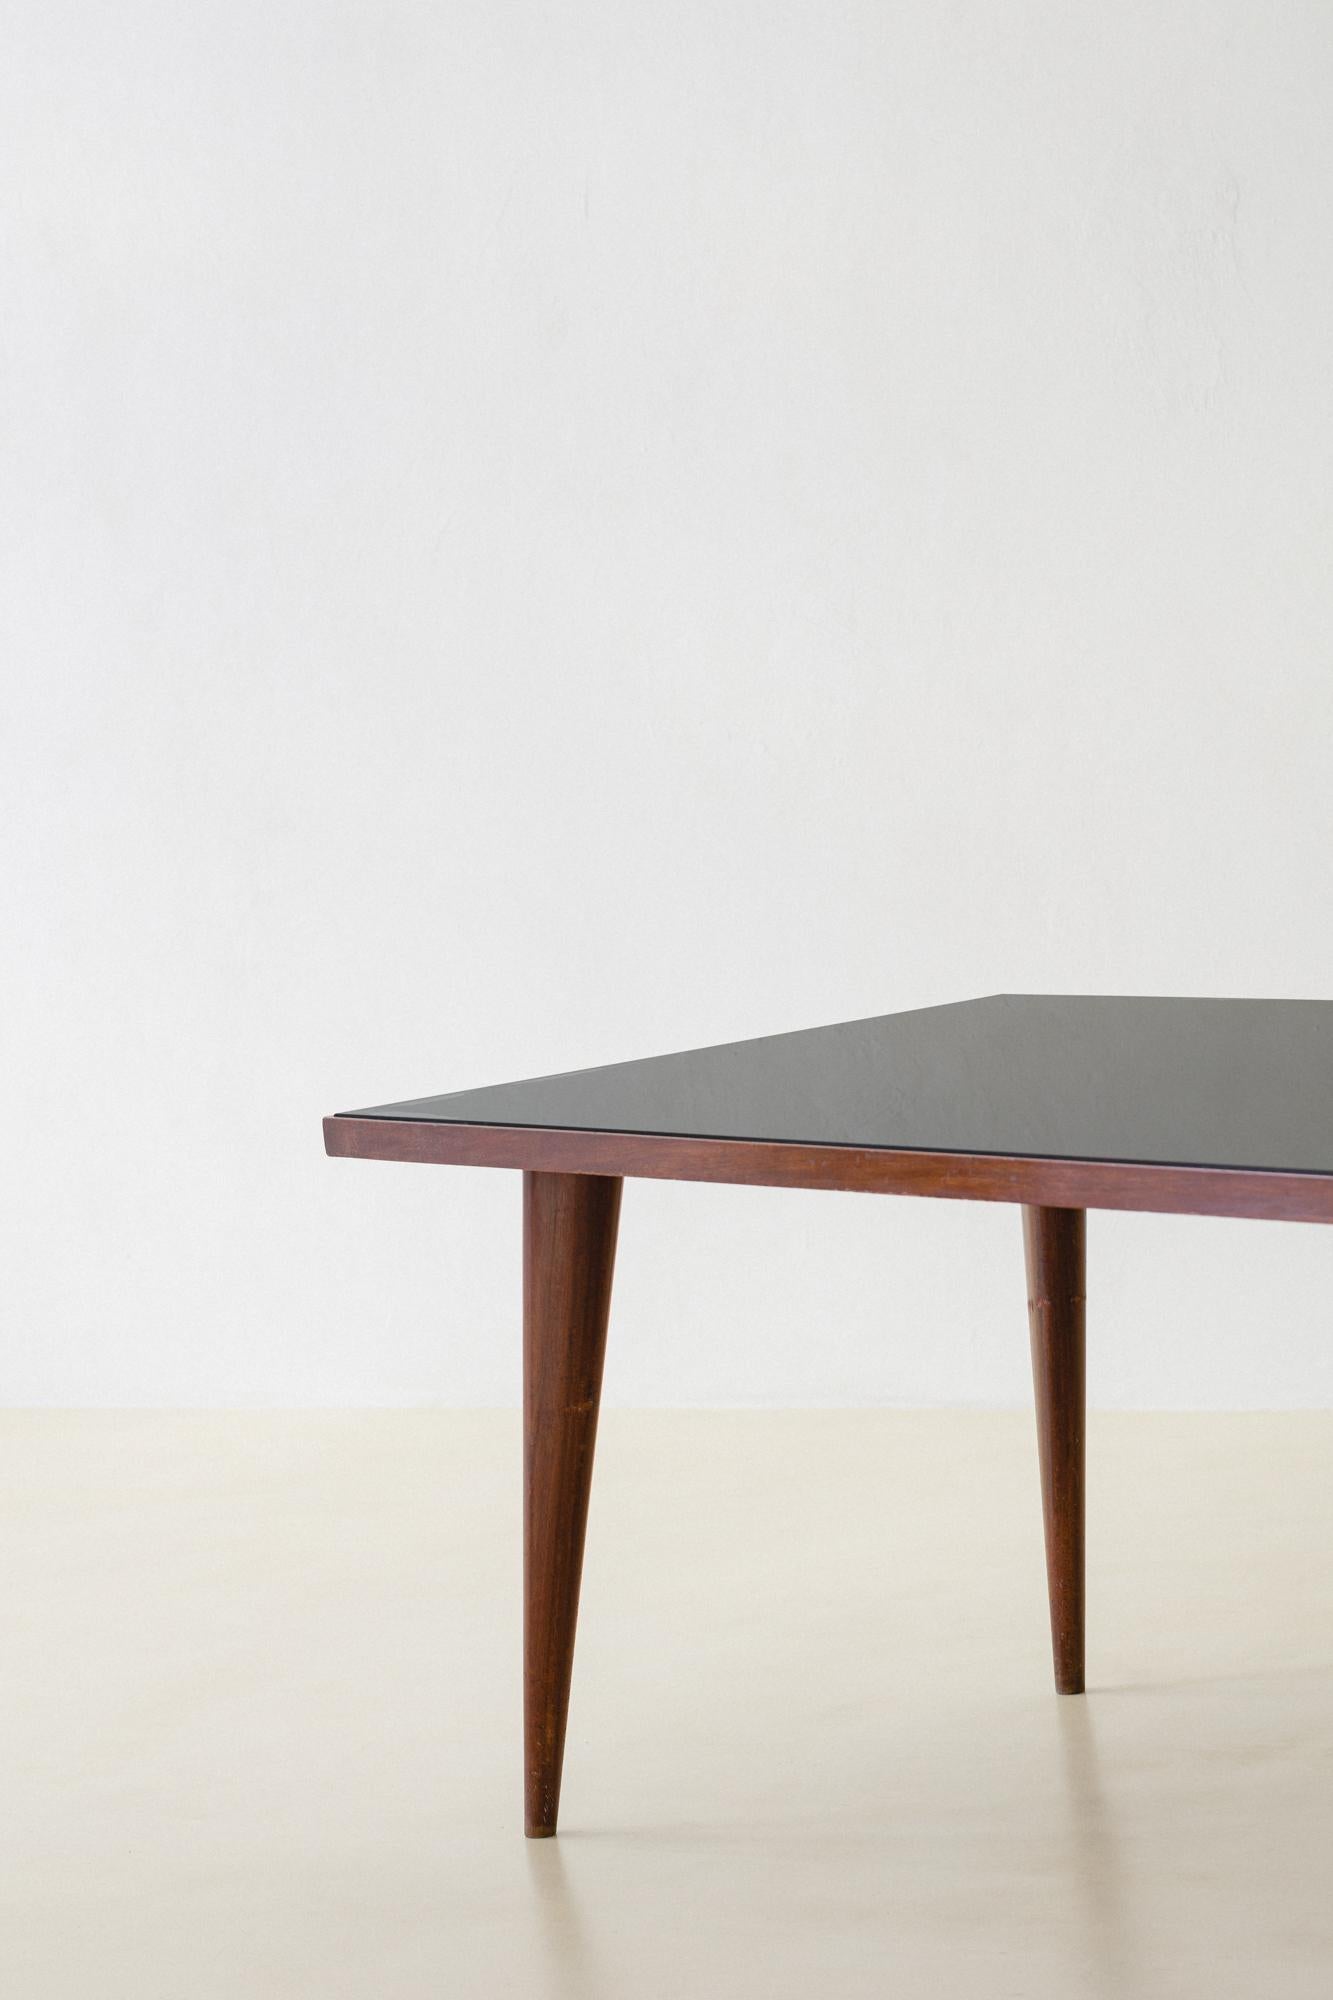 Rosewood Dining Table with Glass Top, Joaquim Tenreiro, 1947, Midcentury Brazil For Sale 1